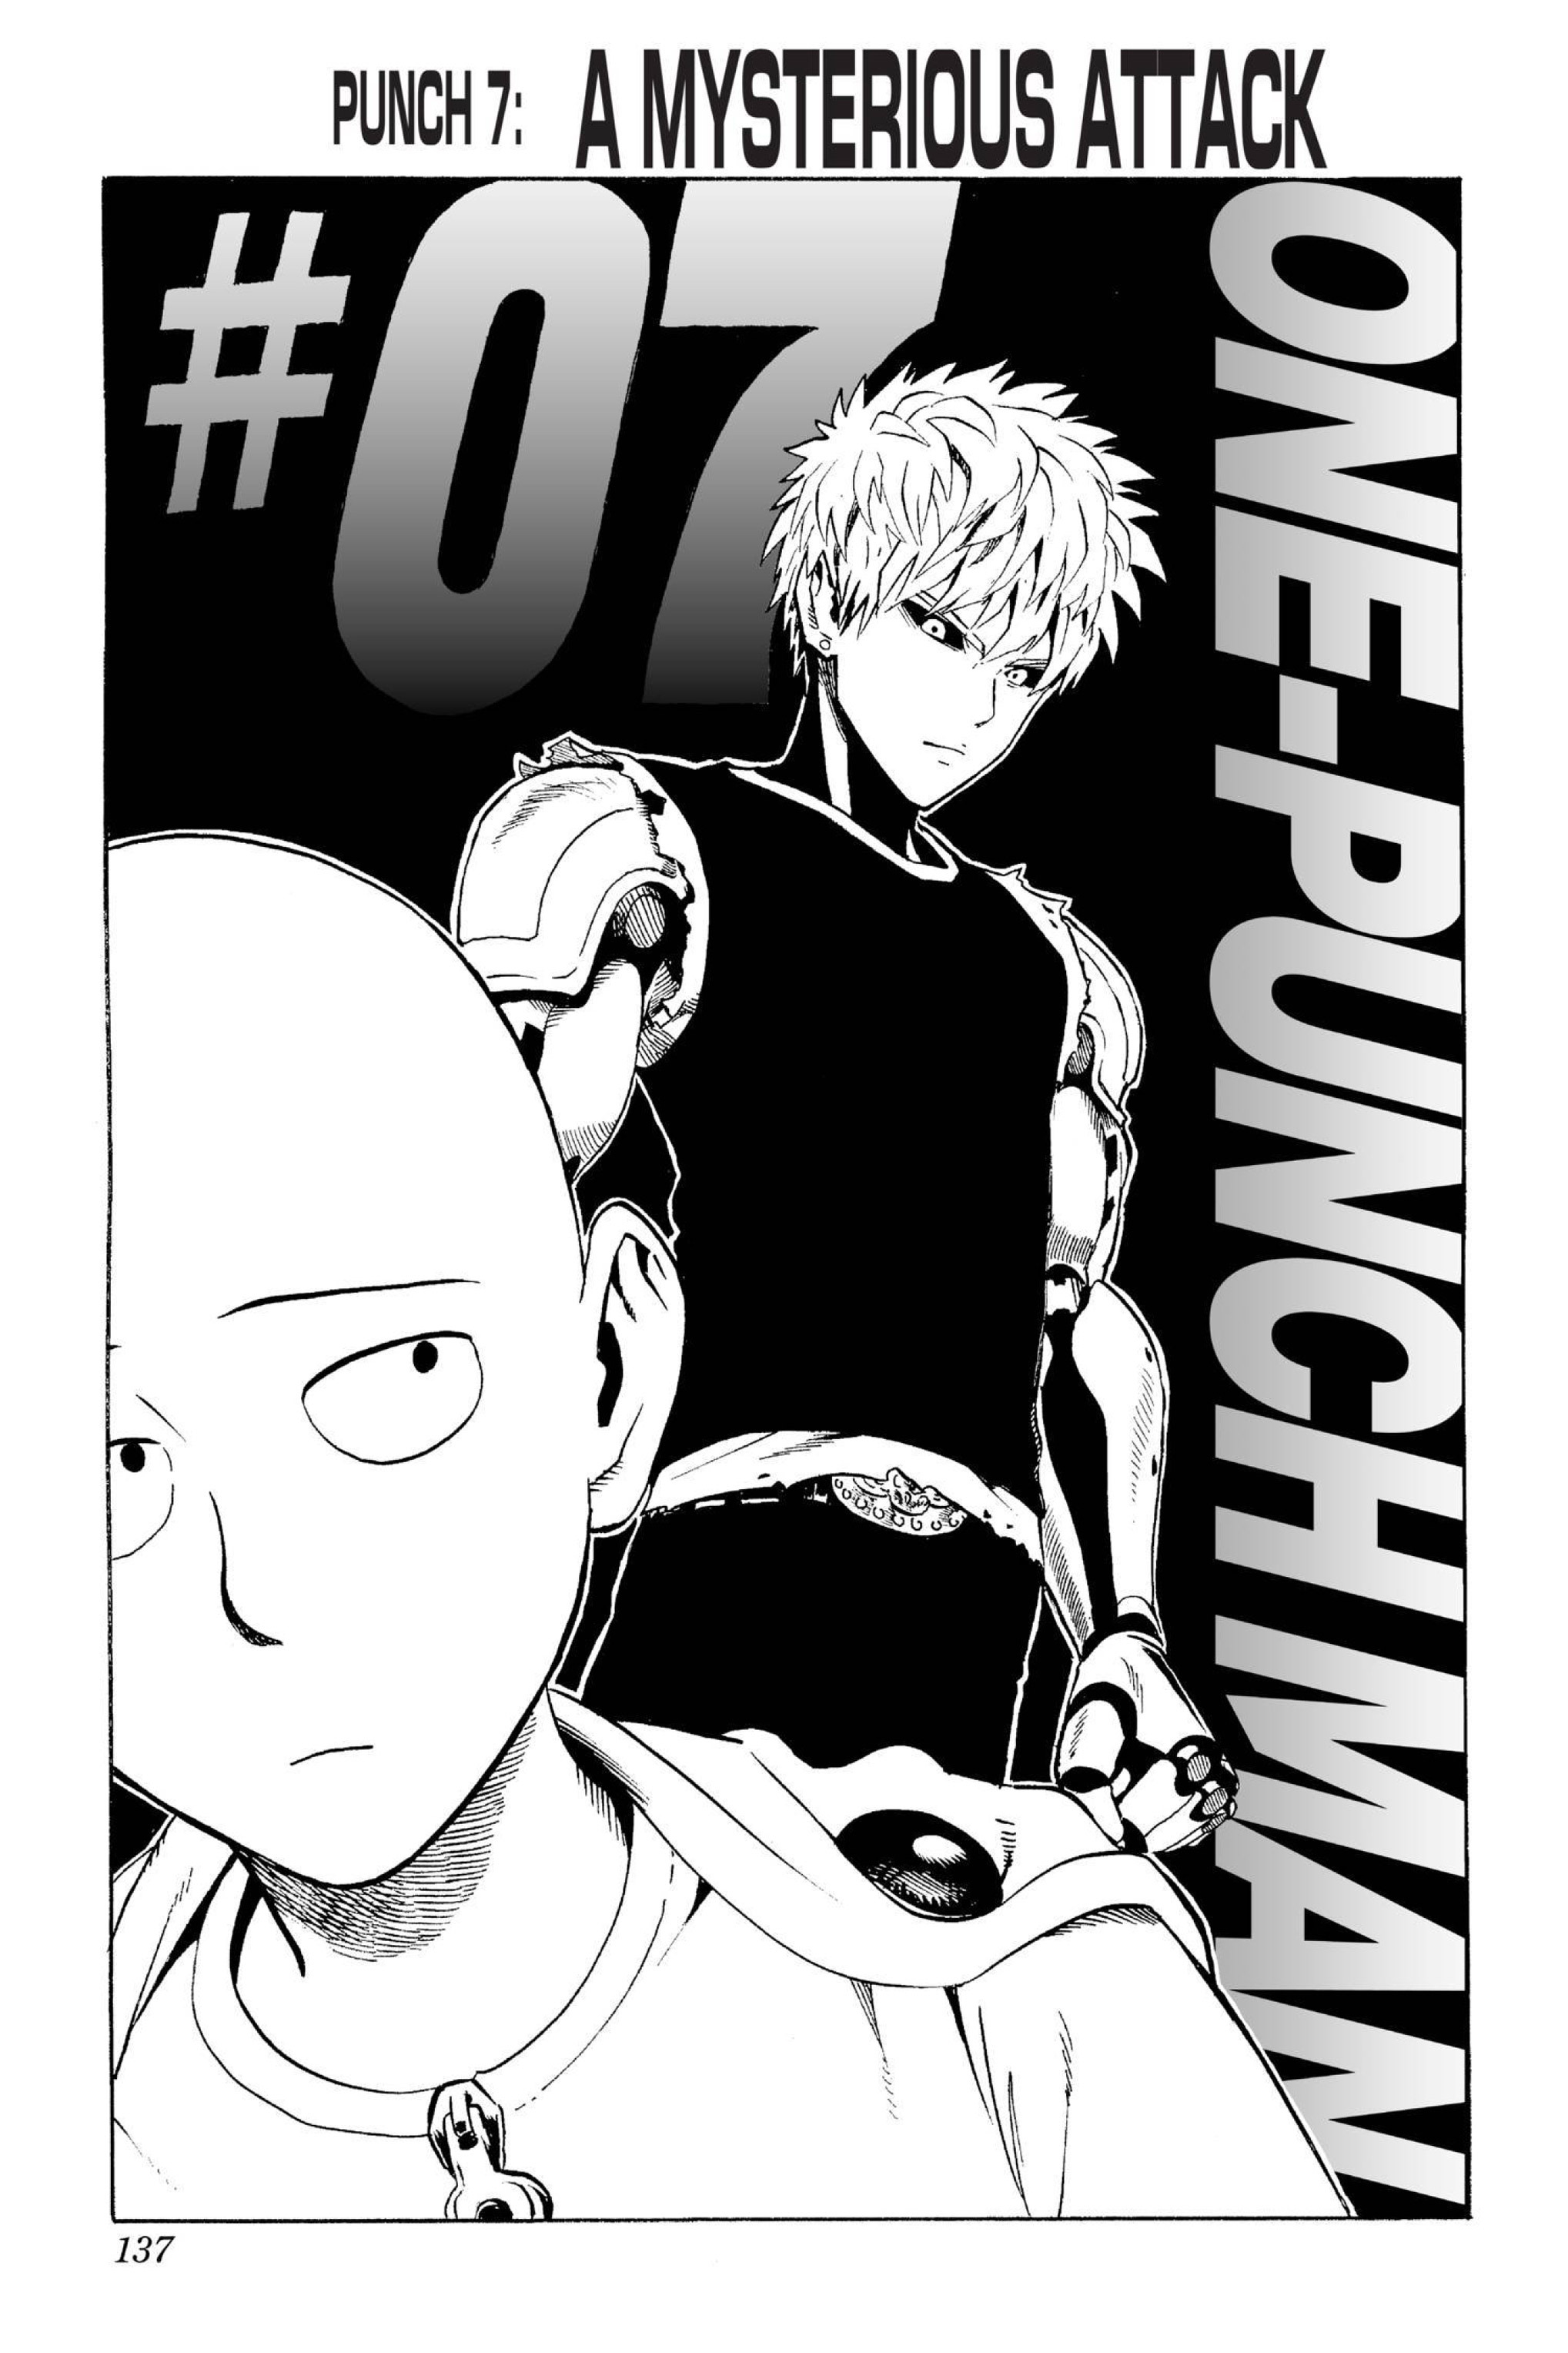 Extra Edition 10, One-Punch Man Wiki